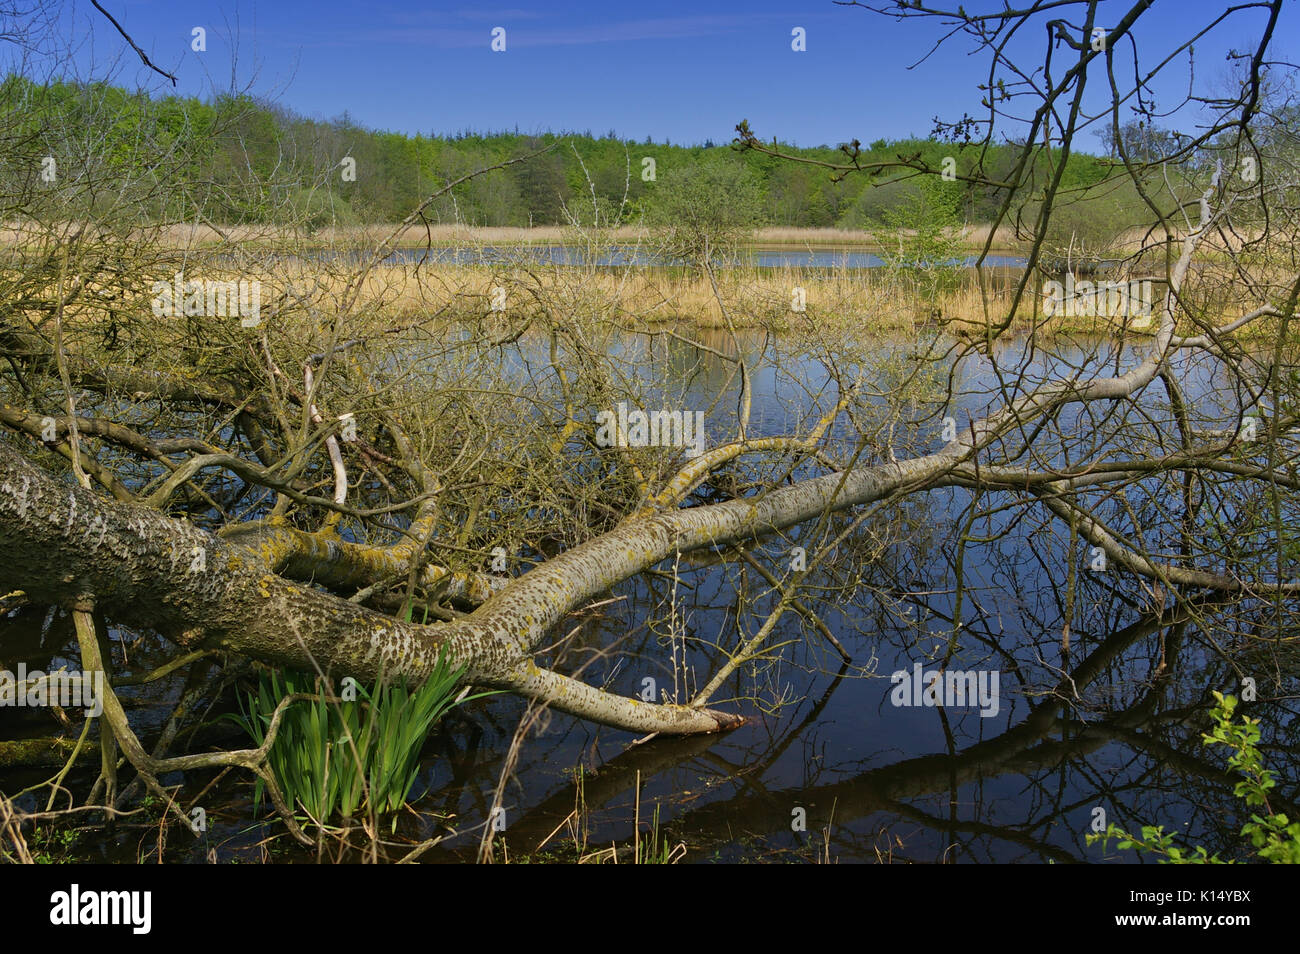 Wetland area with fallen trees, reed, water plants in Denmark Stock Photo